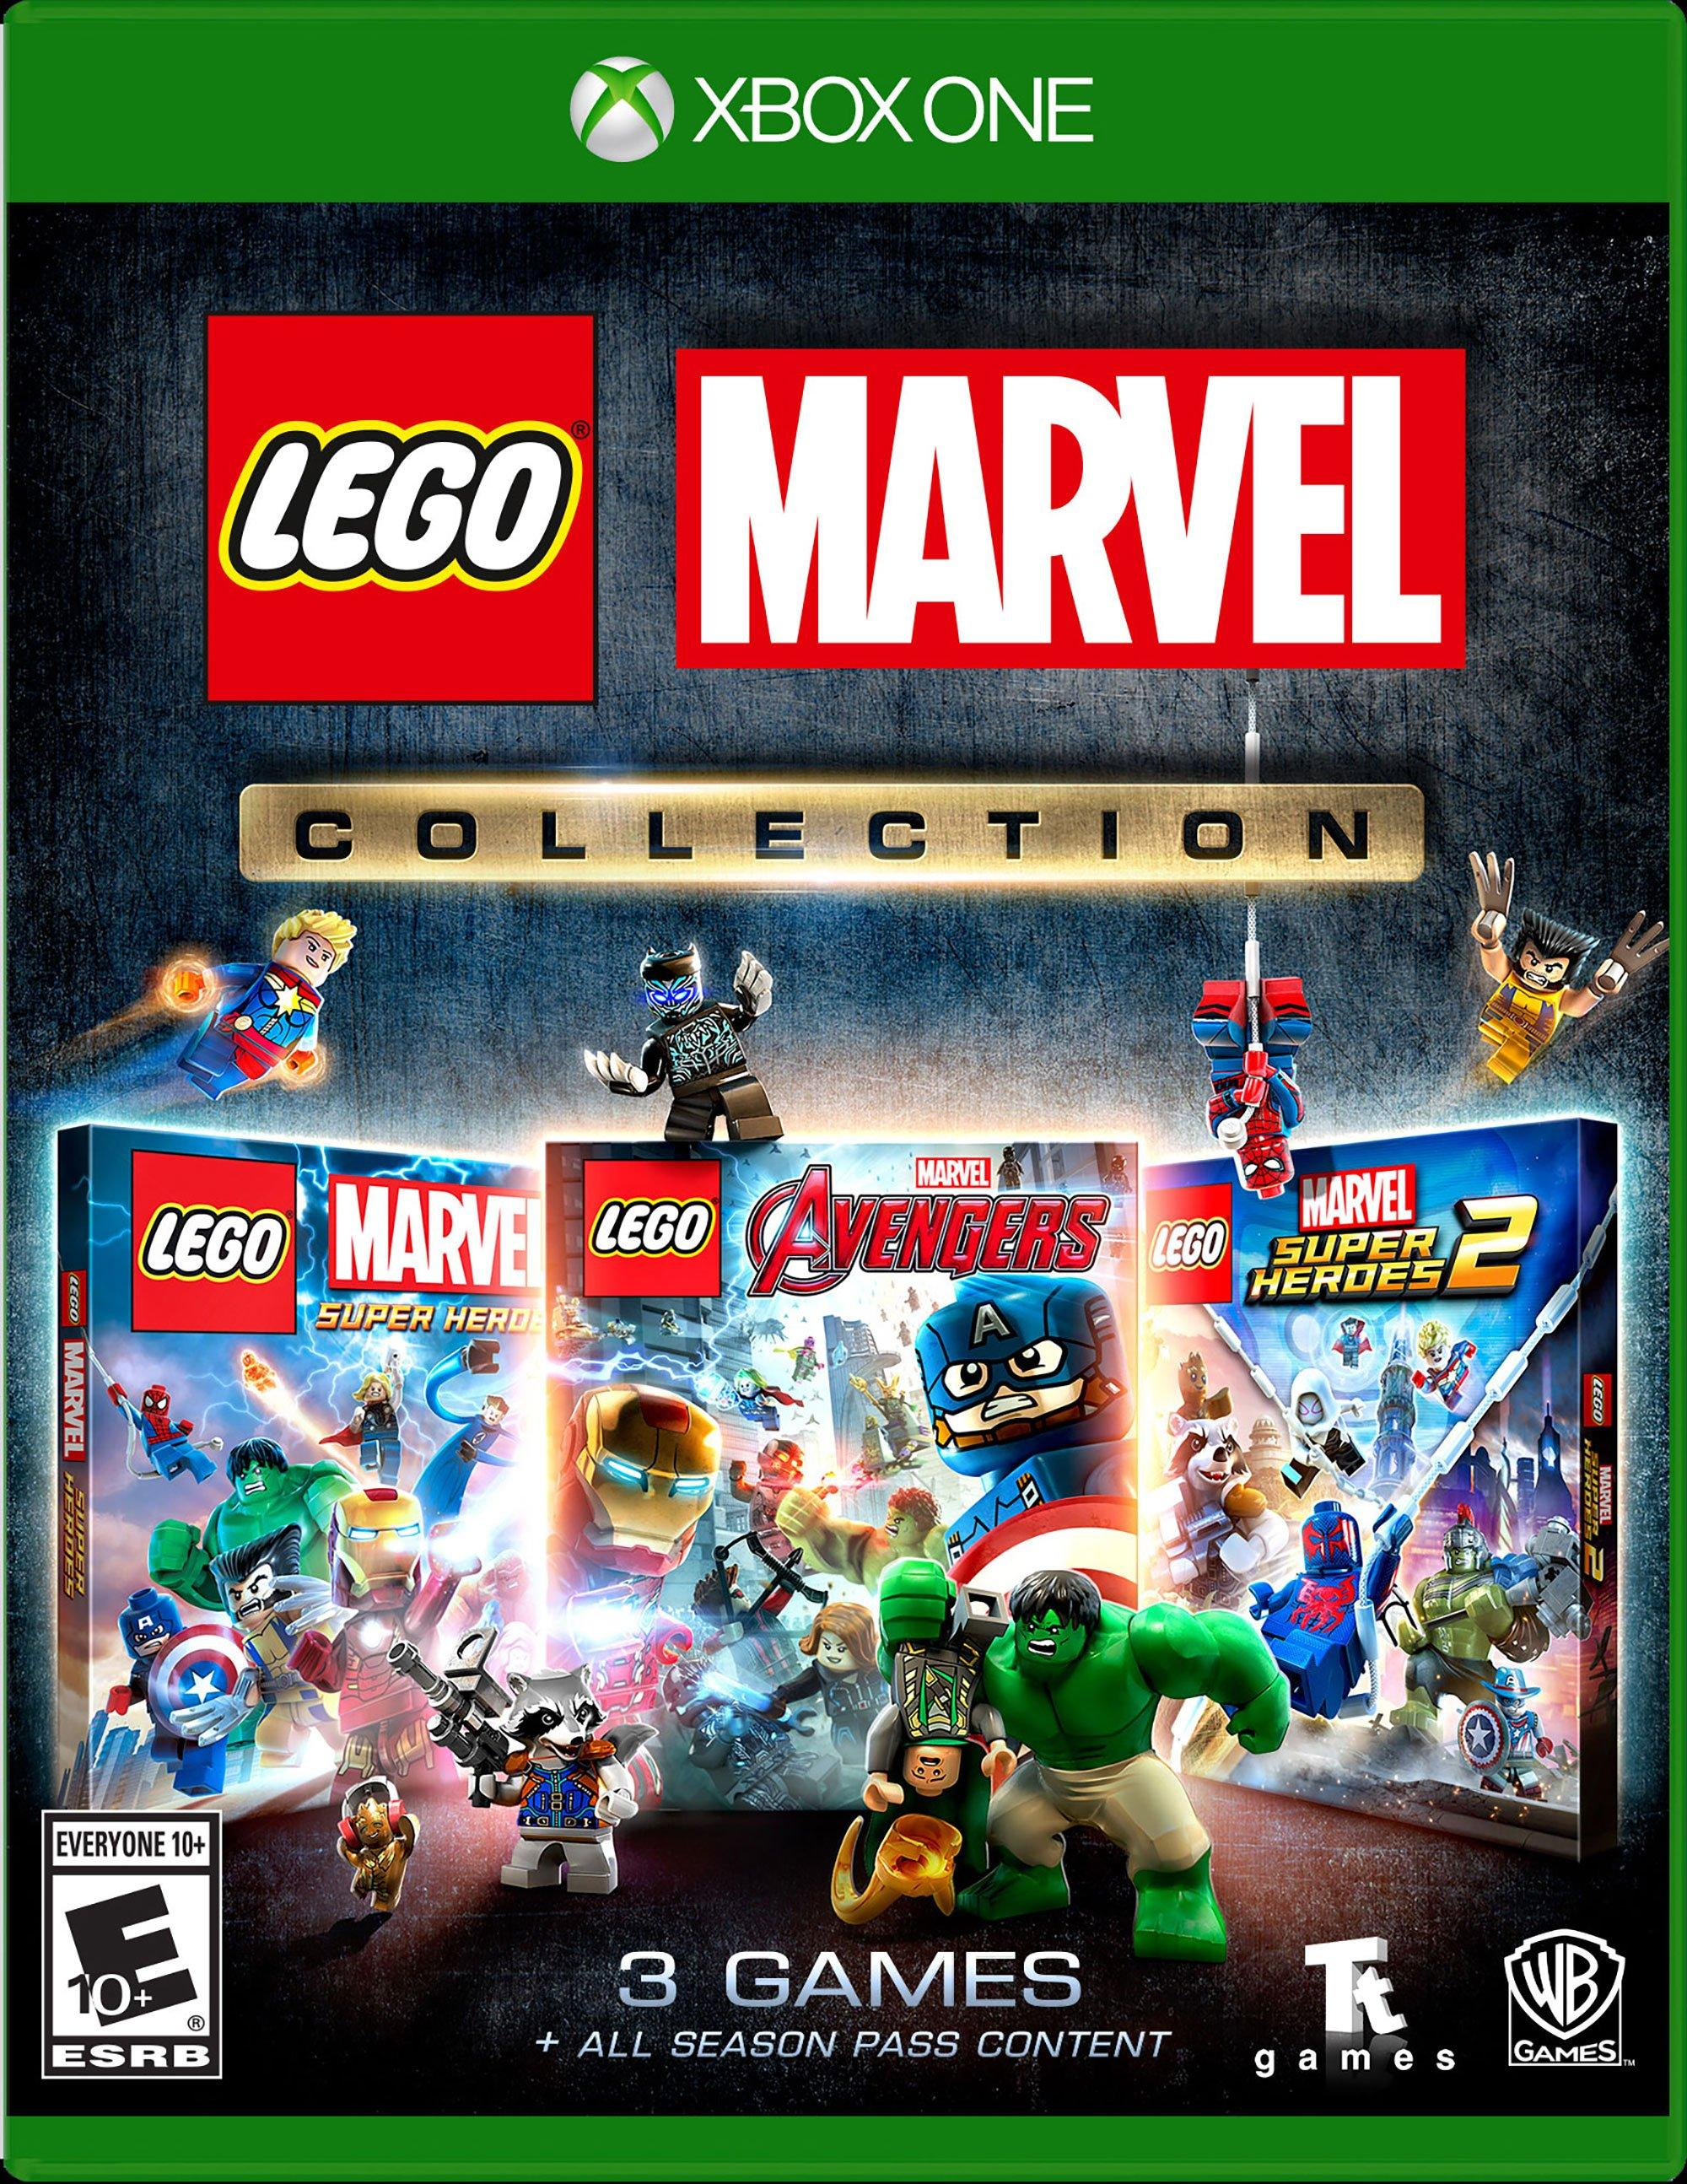 The LEGO Marvel Collection | Xbox One | GameStop $14.99